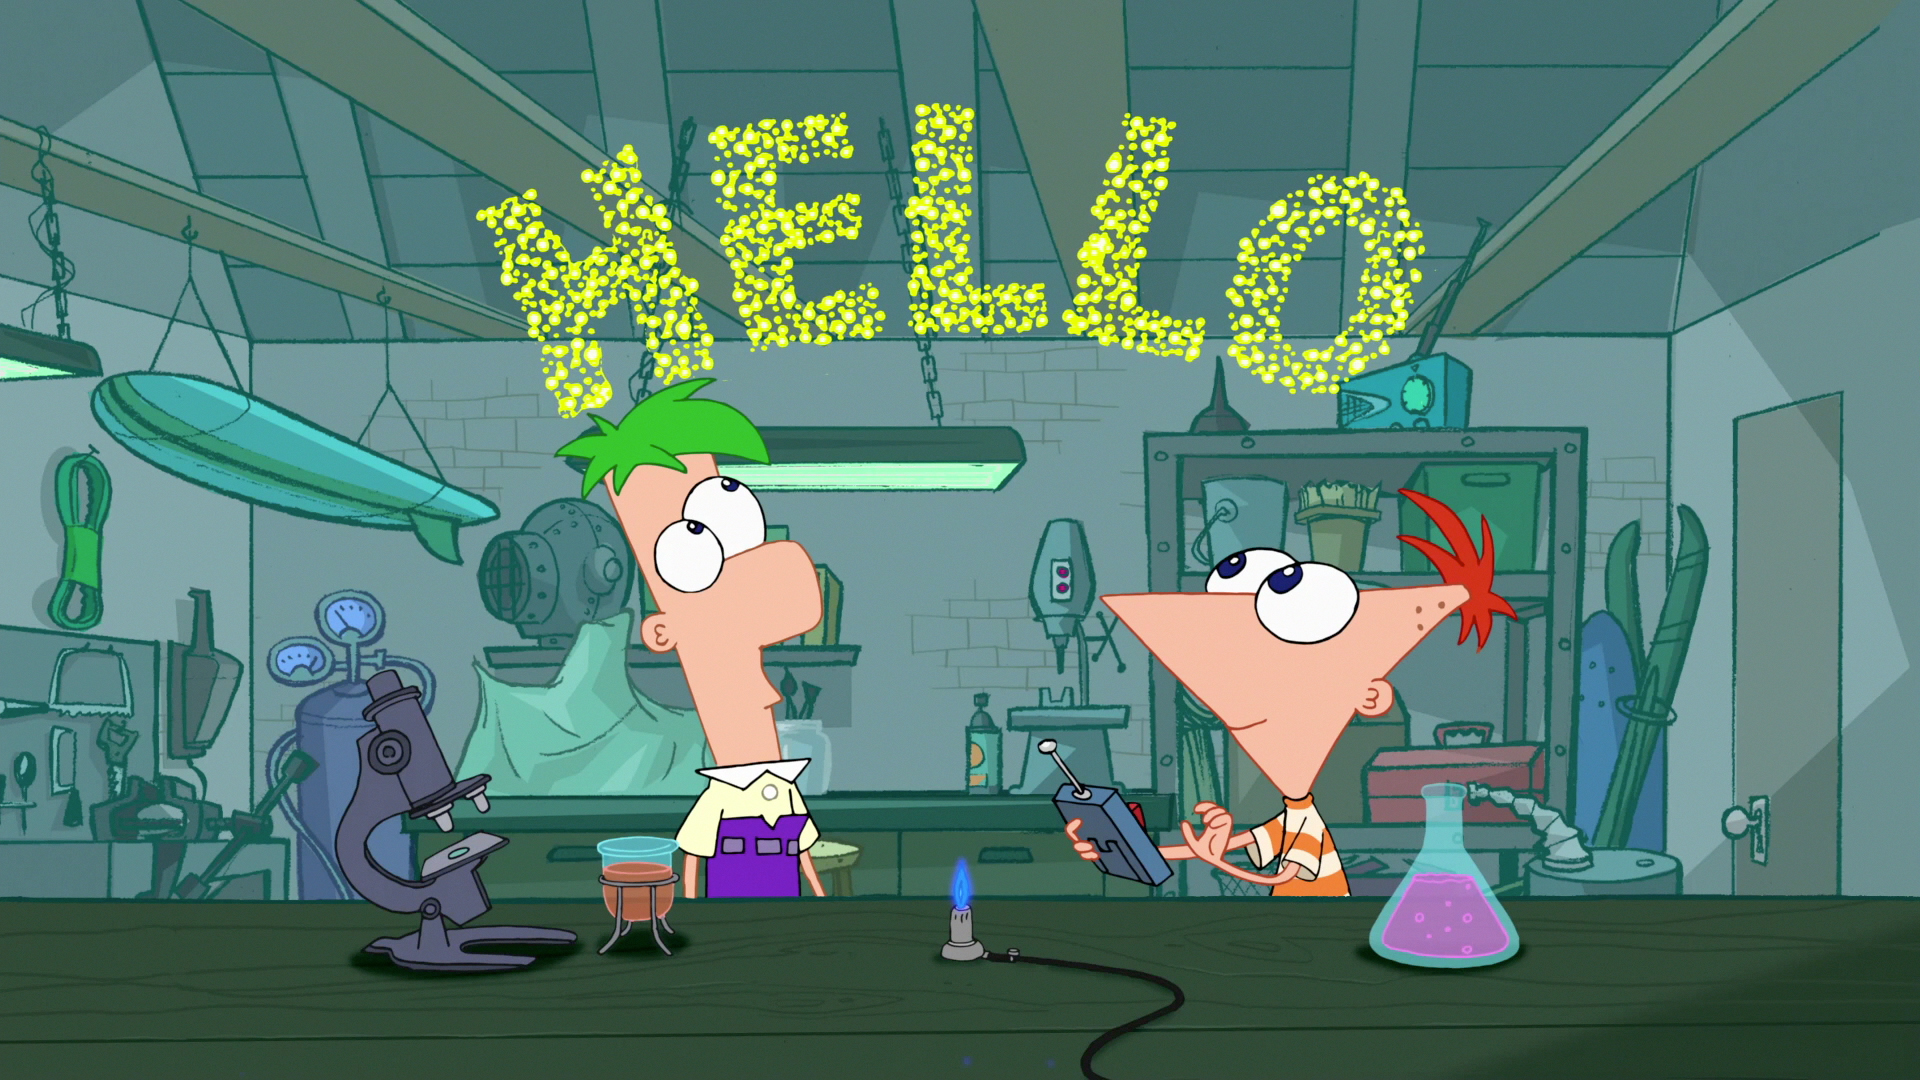 Image Hello Jpg Phineas And Ferb Powered By Wikia